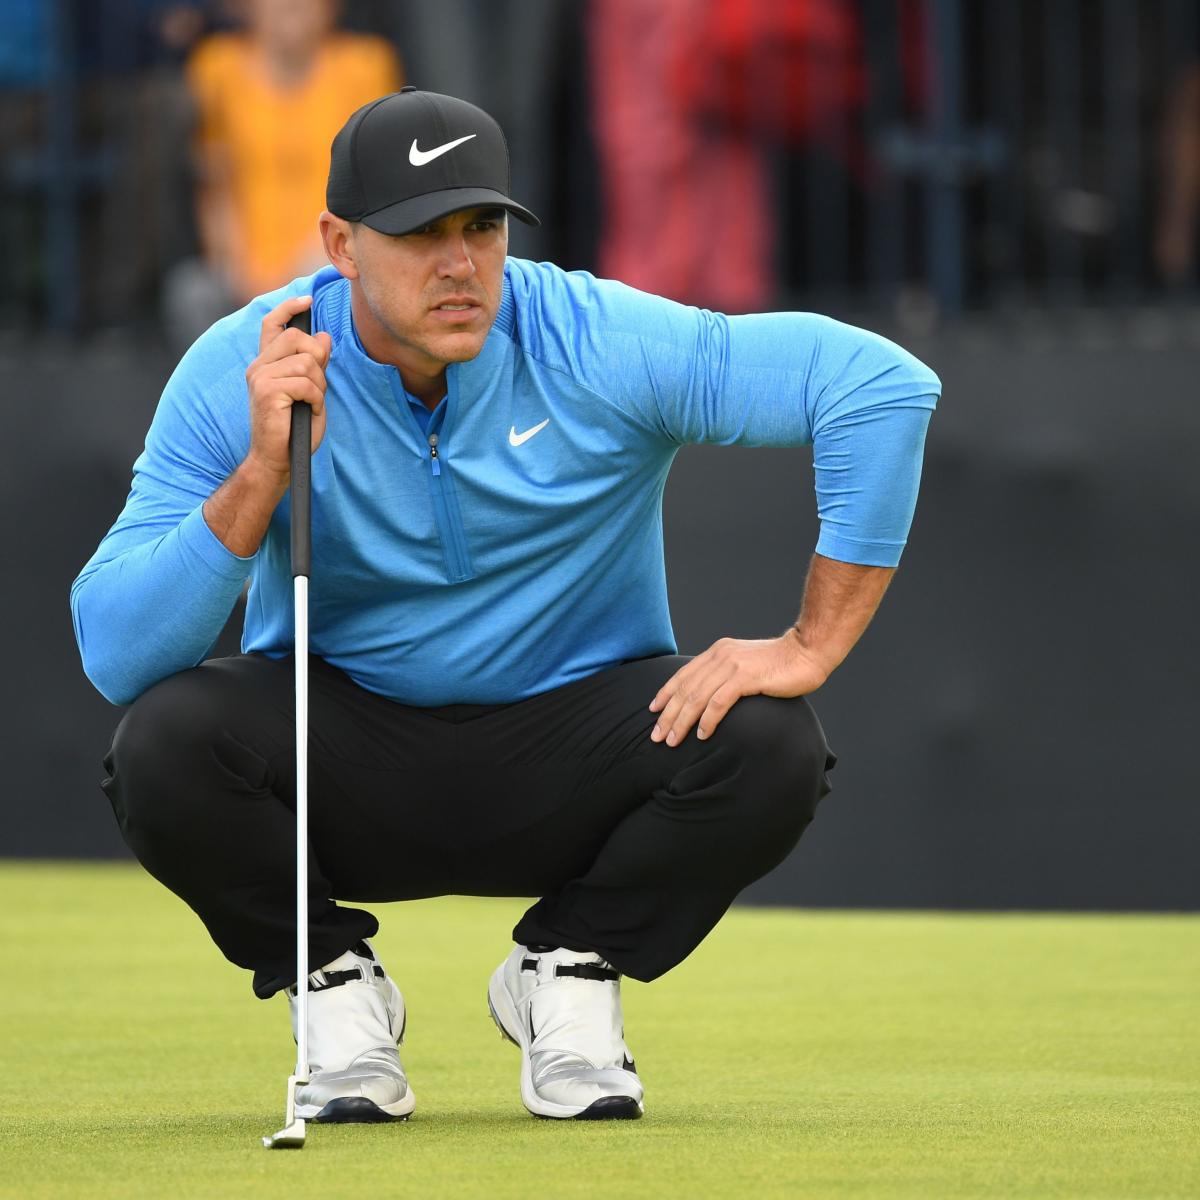 British Open 2019 RealTime Leaderboard Updates for Saturday Leaders